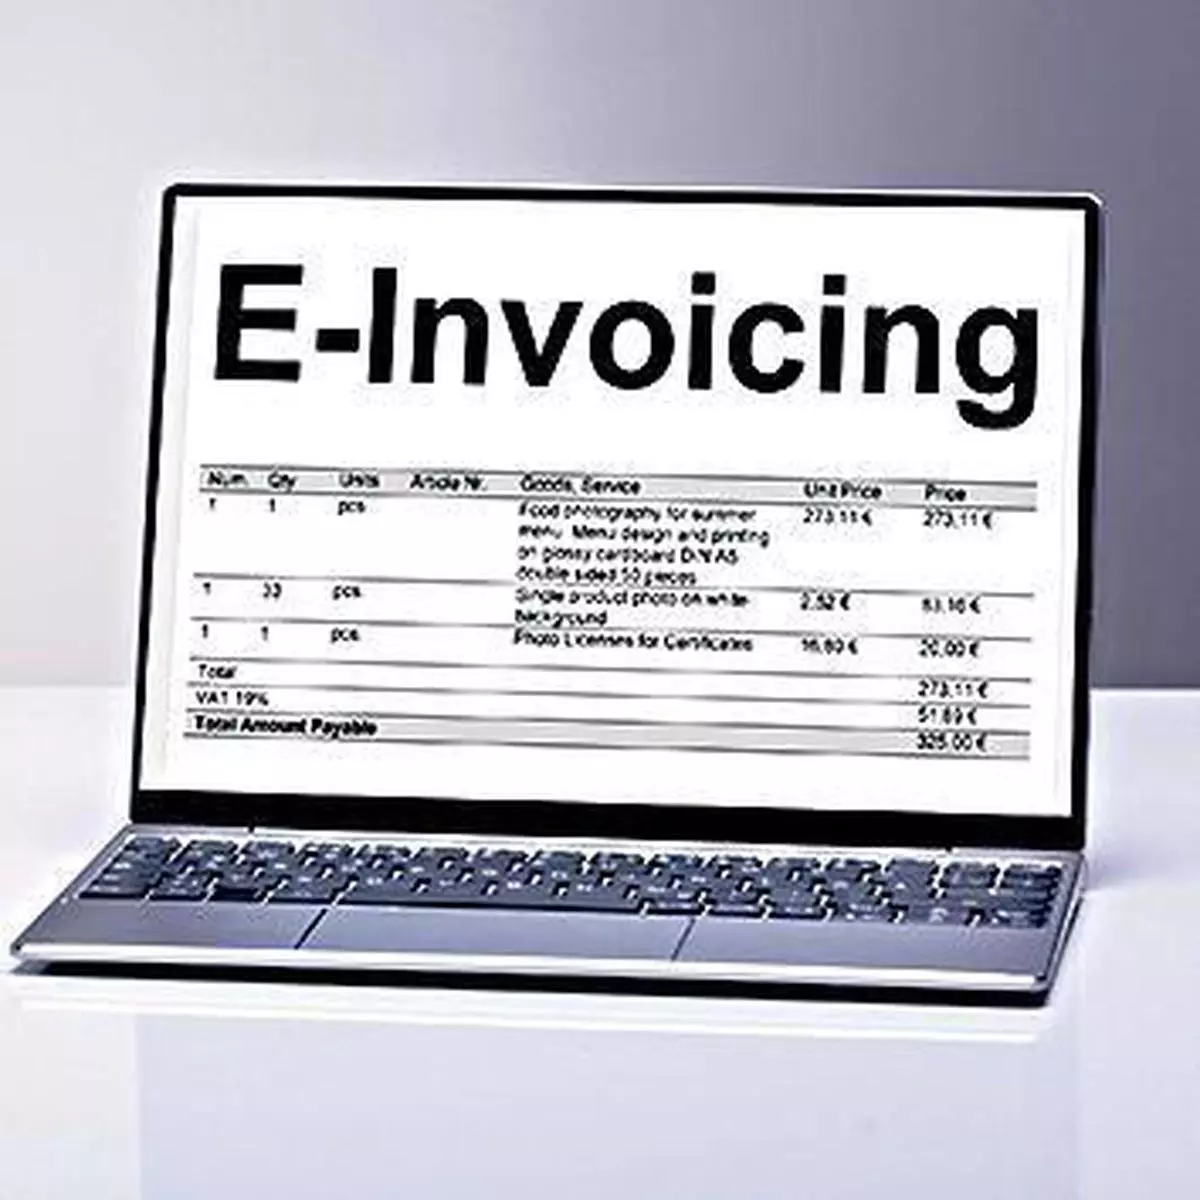 E-invoicing prescribes a standardised format of an invoice that a machine can be read.